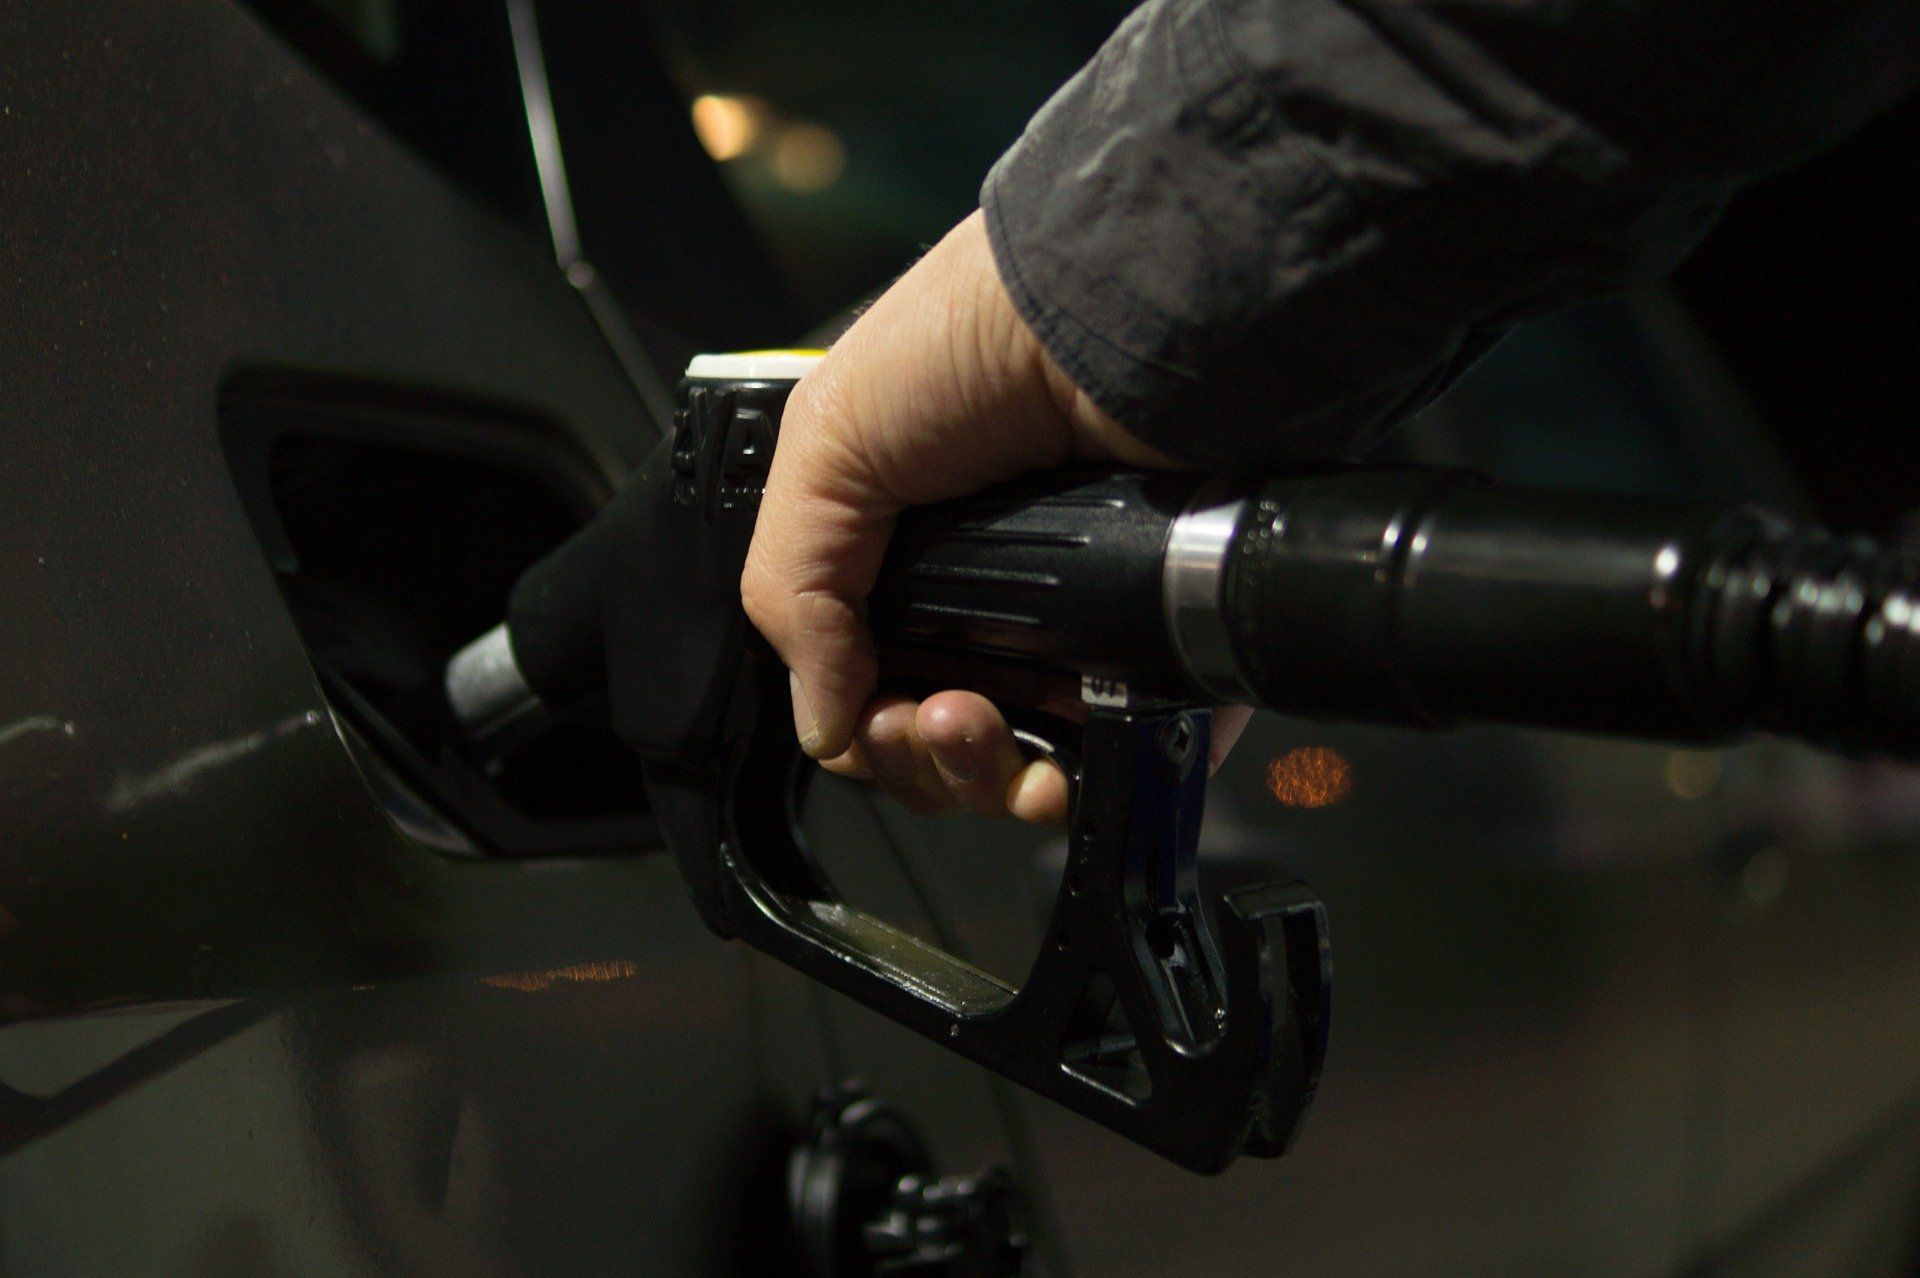 Fuel price today: Petrol and Diesel rates remain unchanged on April 22, 2022